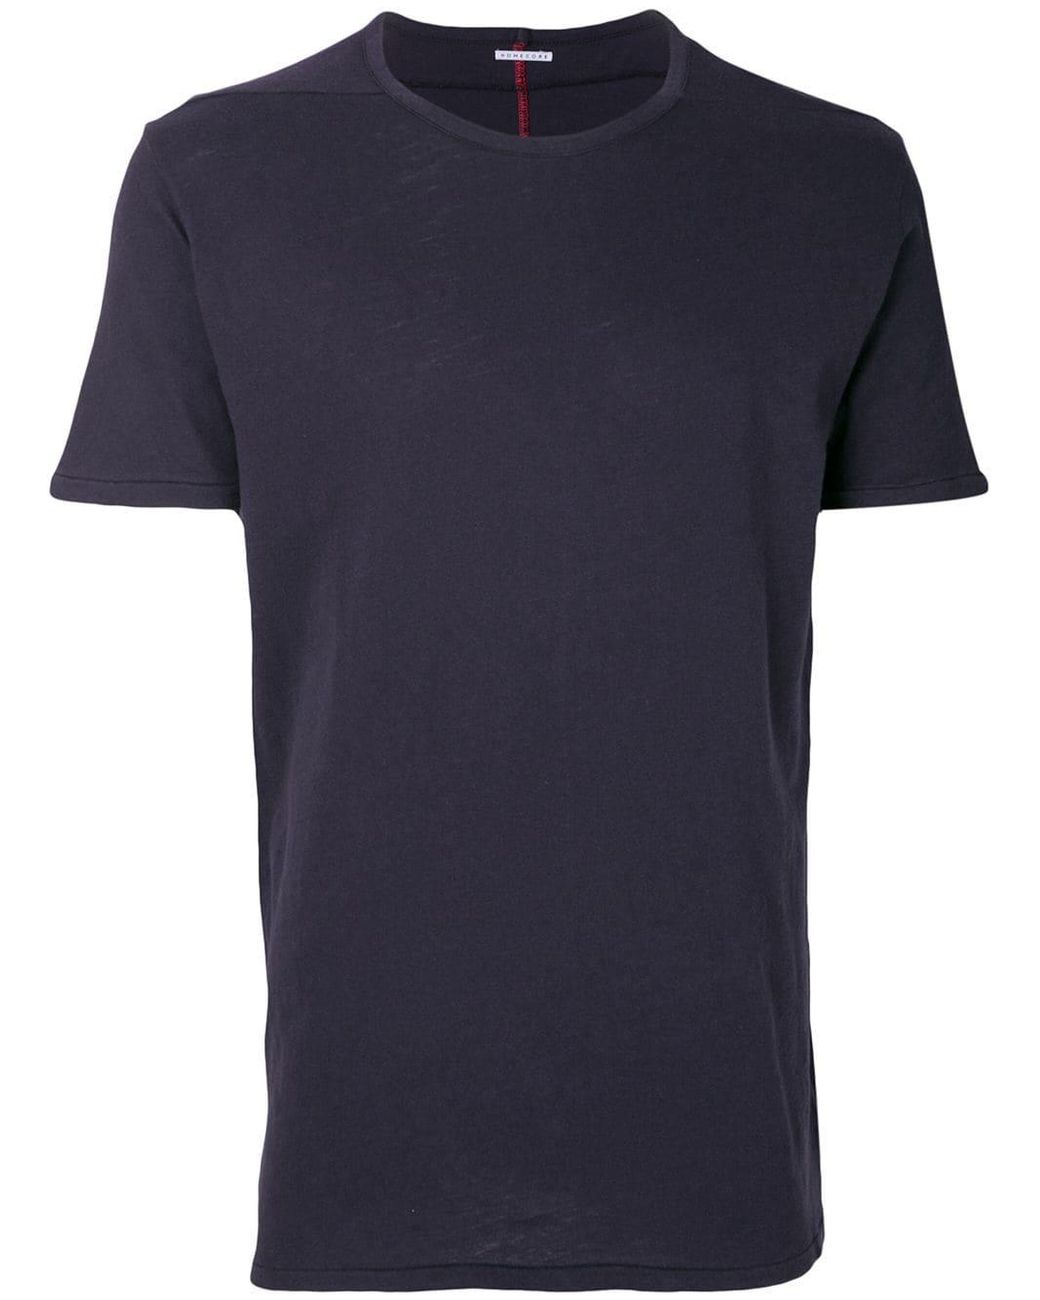 Homecore Cotton Rodger T-shirt in Blue for Men - Lyst